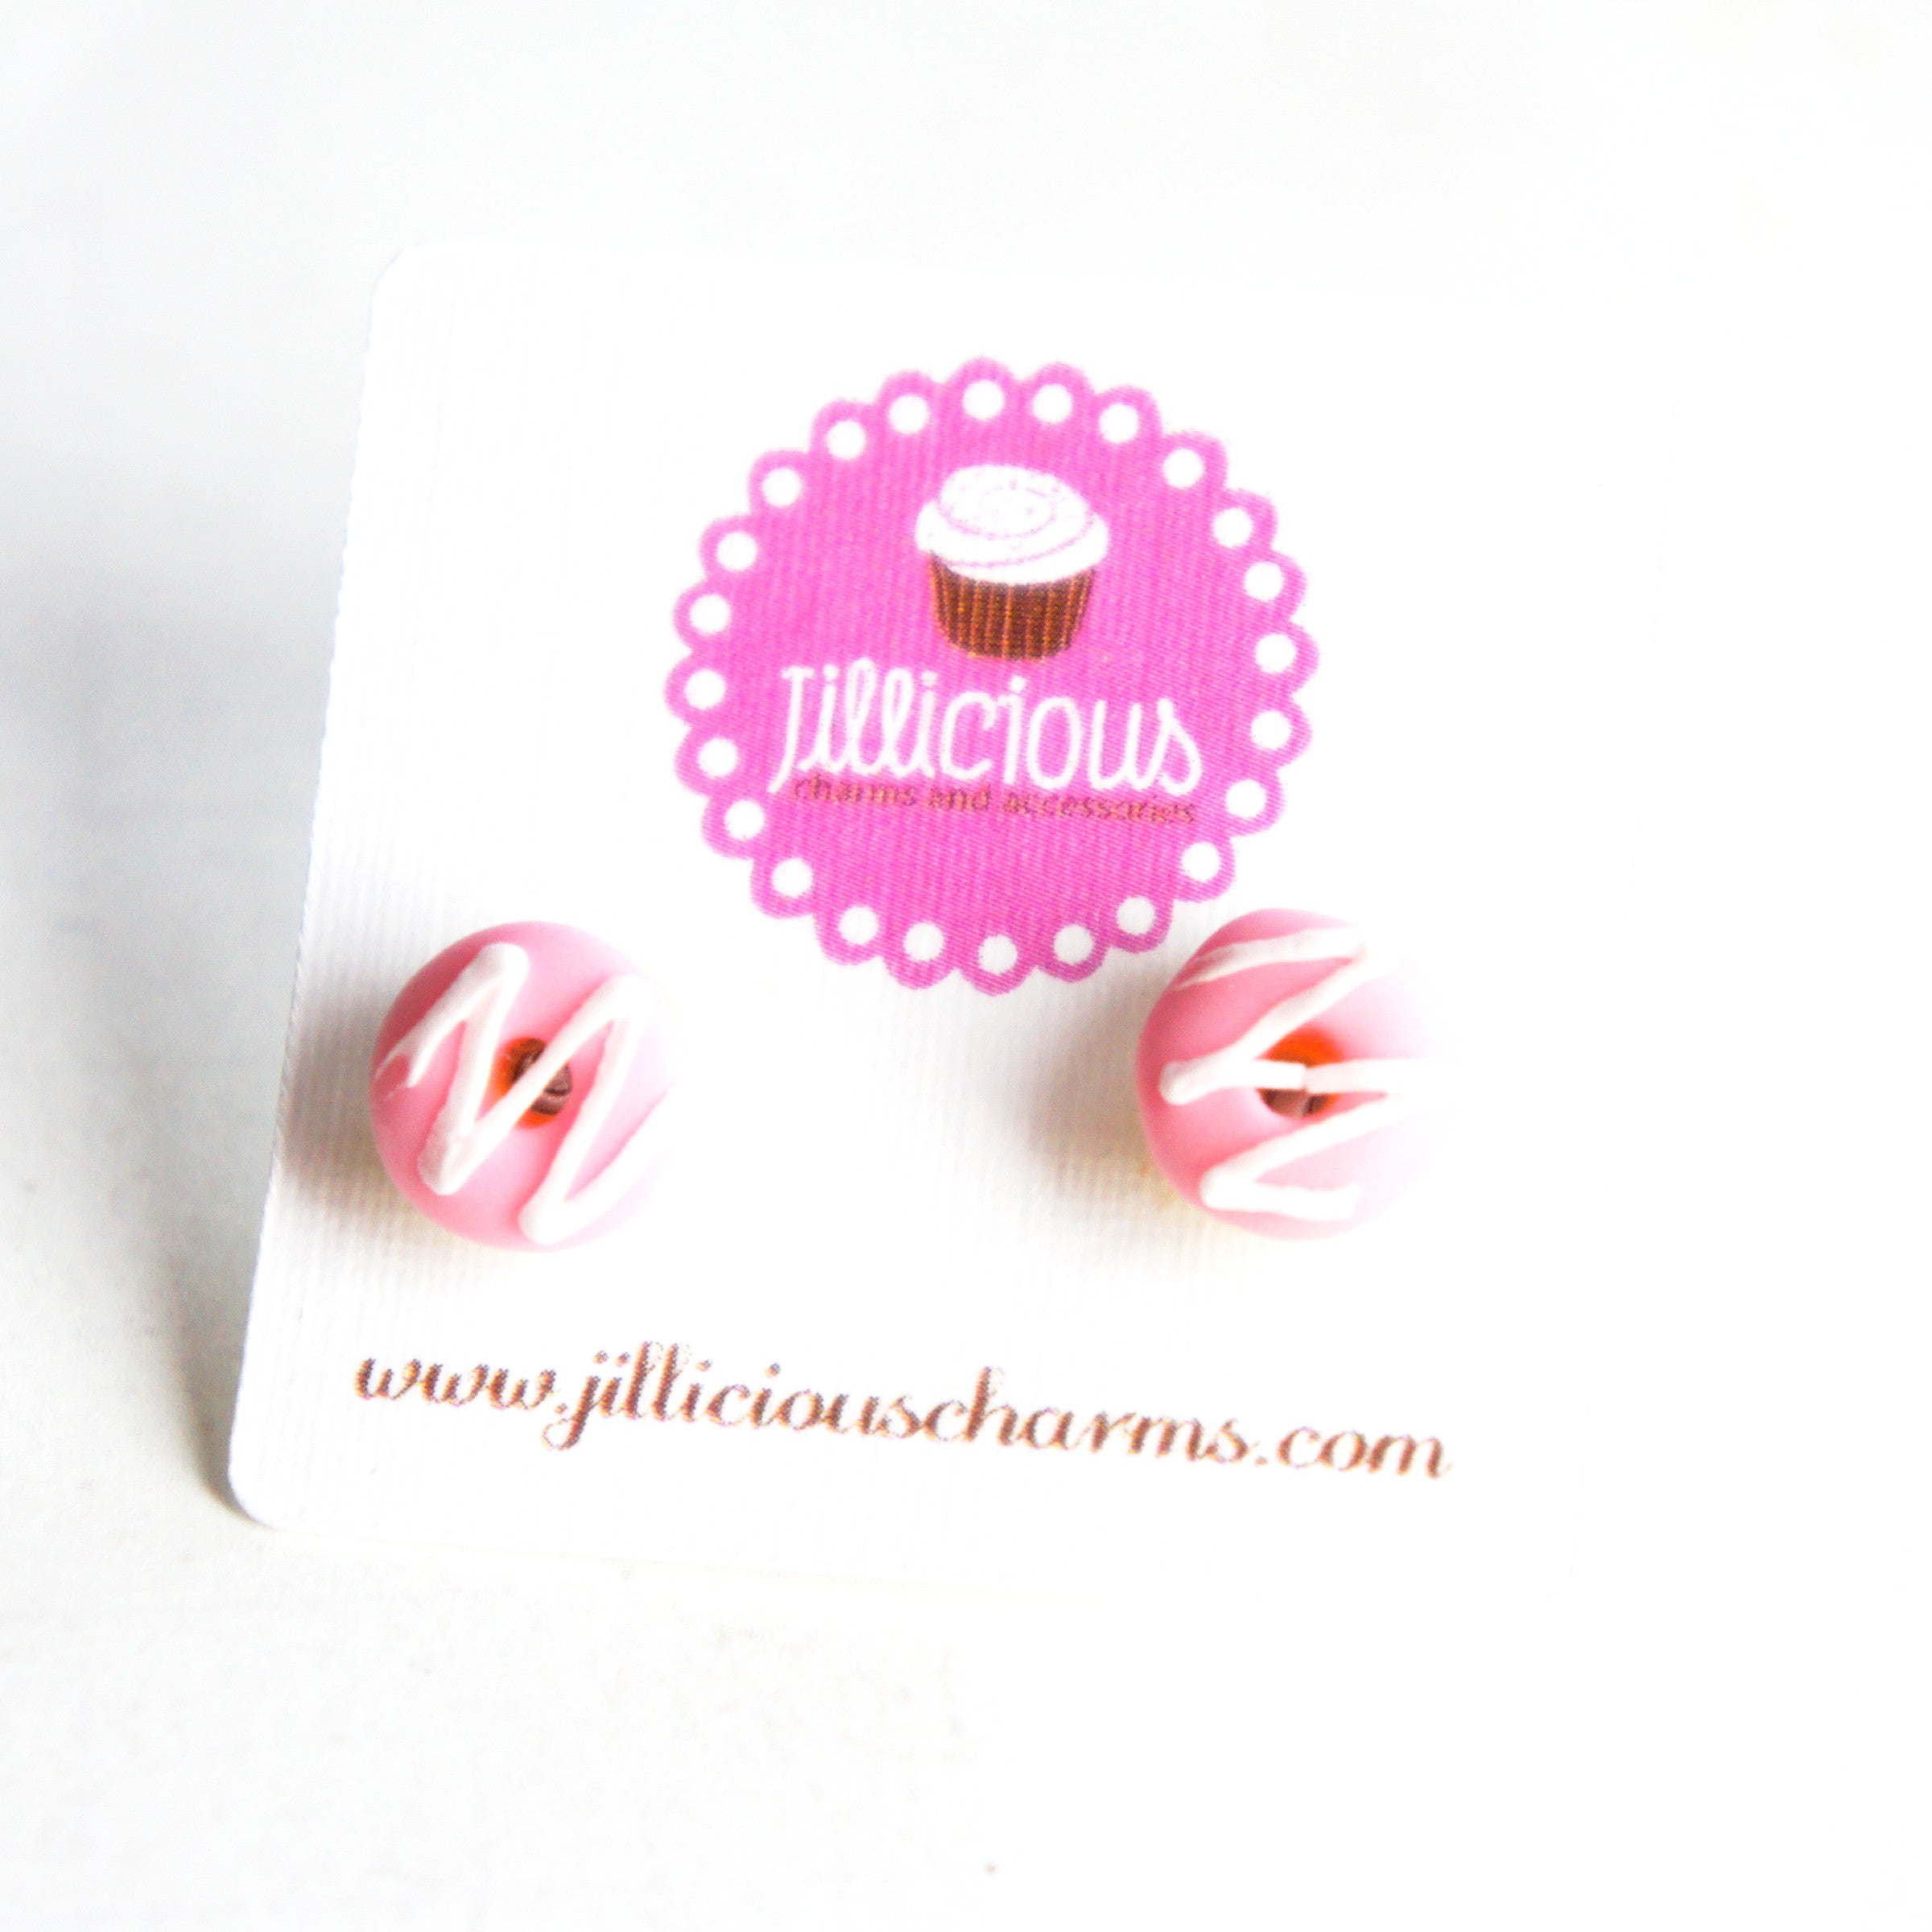 Strawberry Donuts w/ White Chocolate Drizzle Stud Earrings - Jillicious charms and accessories